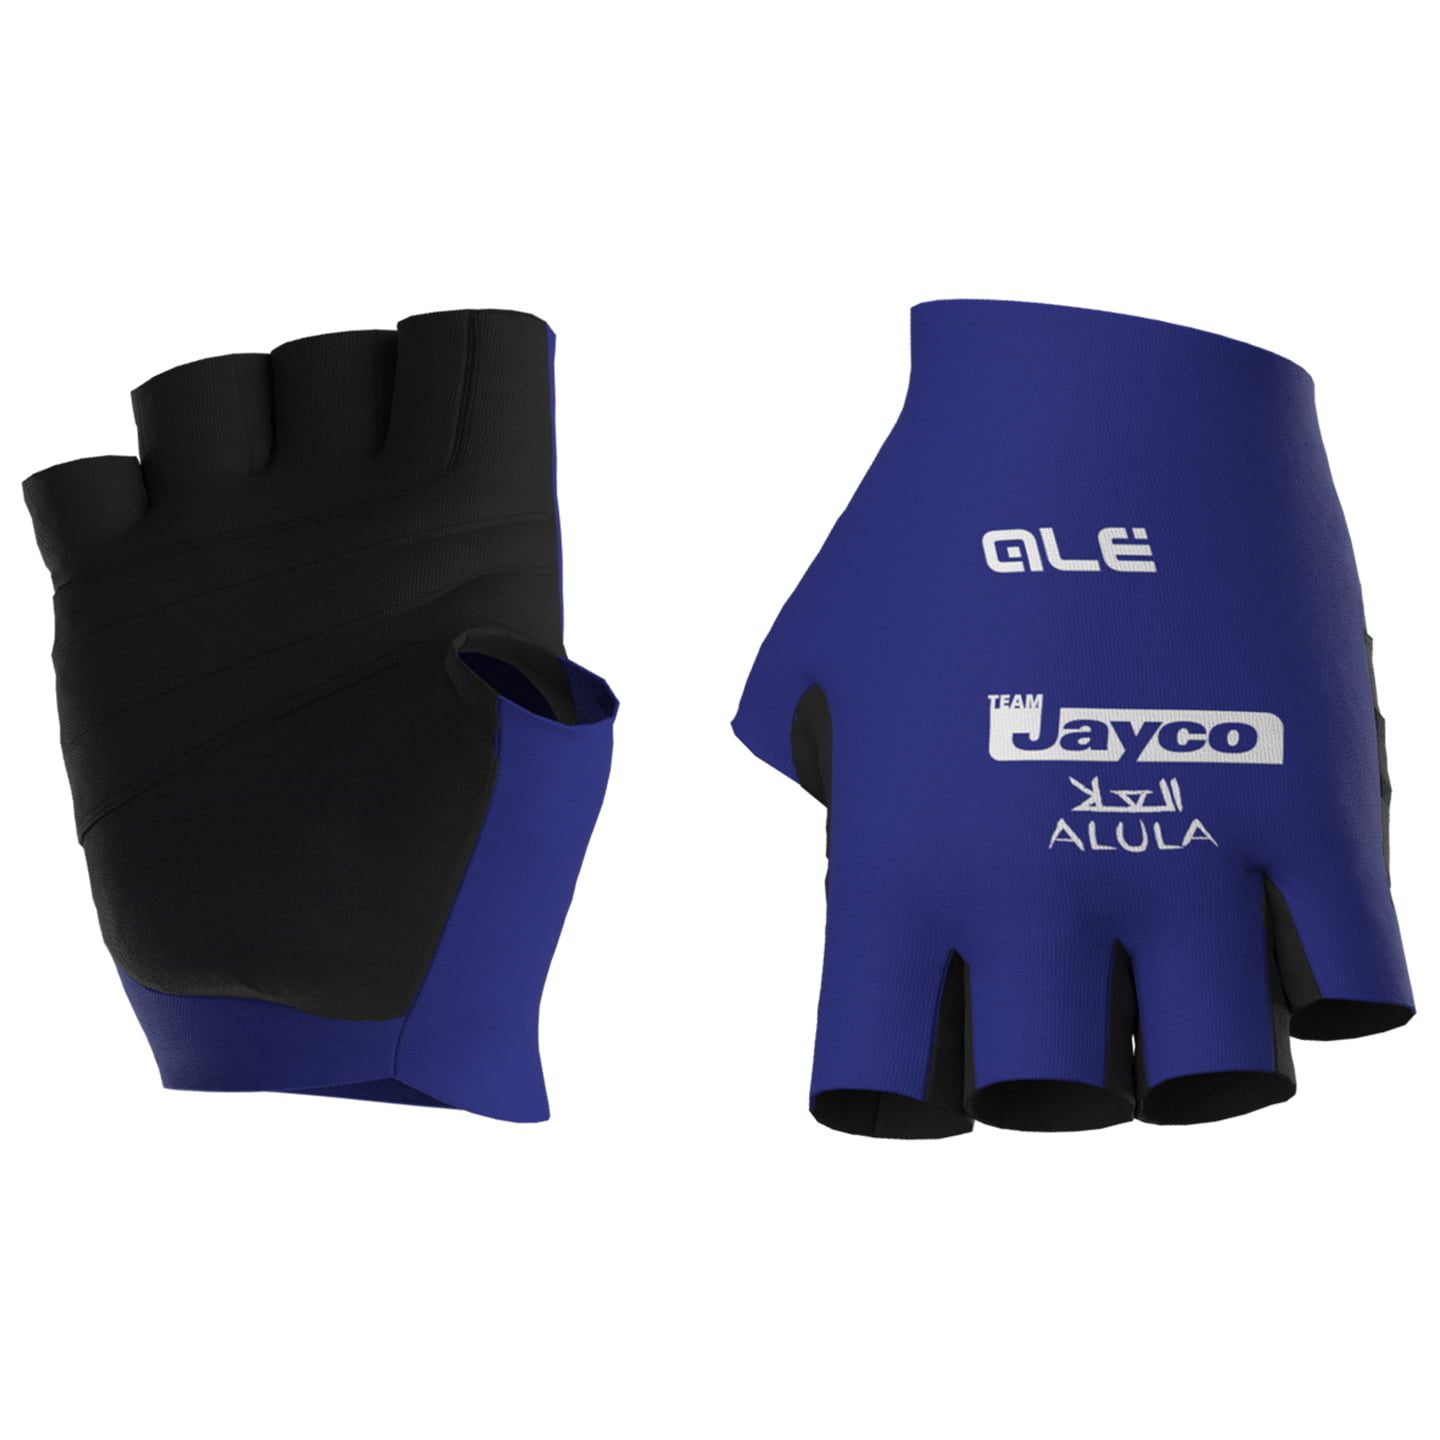 TEAM JAYCO-ALULA 2023 Cycling Gloves, for men, size 2XL, Cycling gloves, Cycle clothing